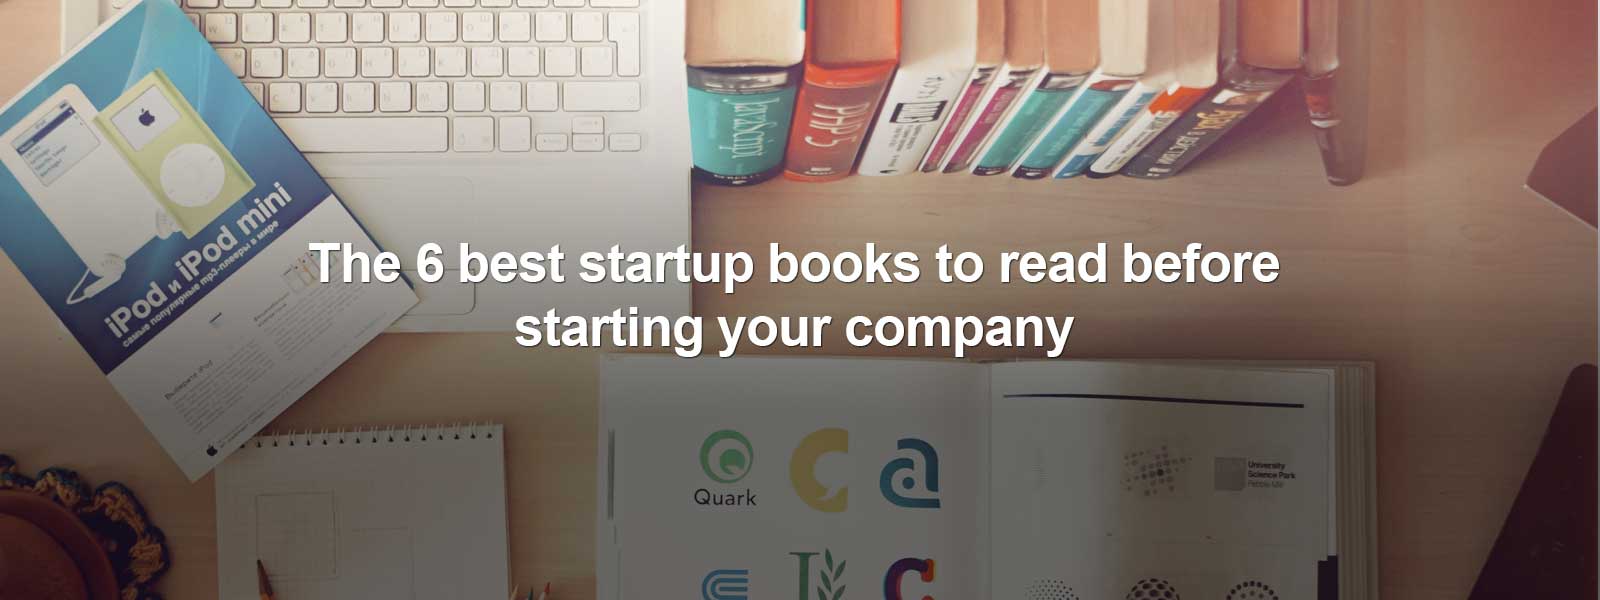 Virtual Assistant Directory - the 6 best startup books to read before starting your company